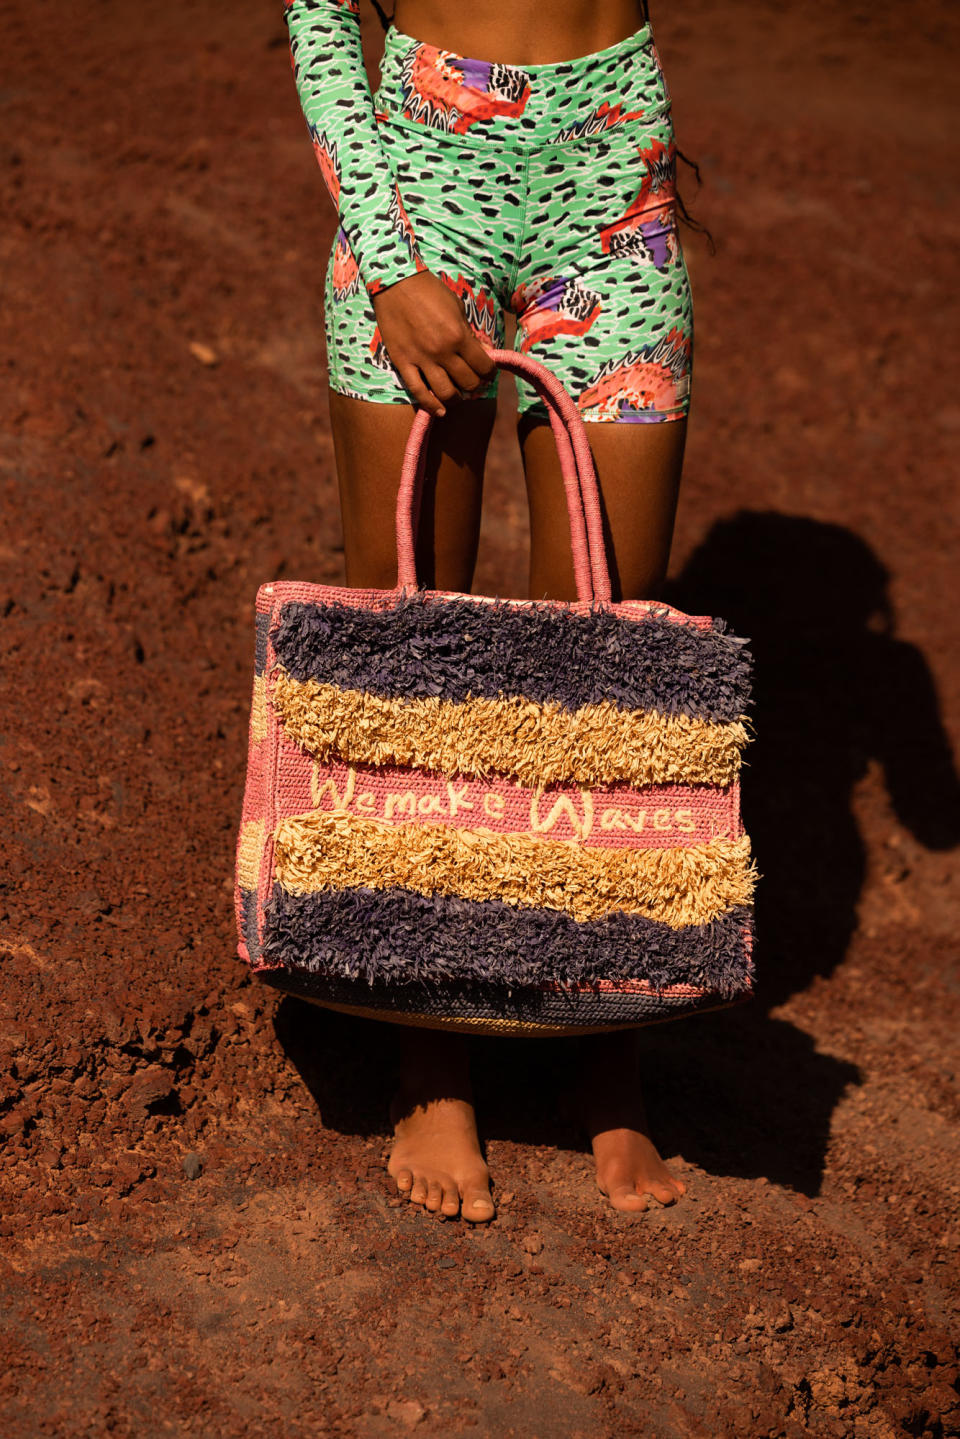 The Roxy x Stella Jean collaboration includes the “Raphia” bag, which was handmade by female artisans in Antananarivo, Madagascar. - Credit: Courtesy Photo